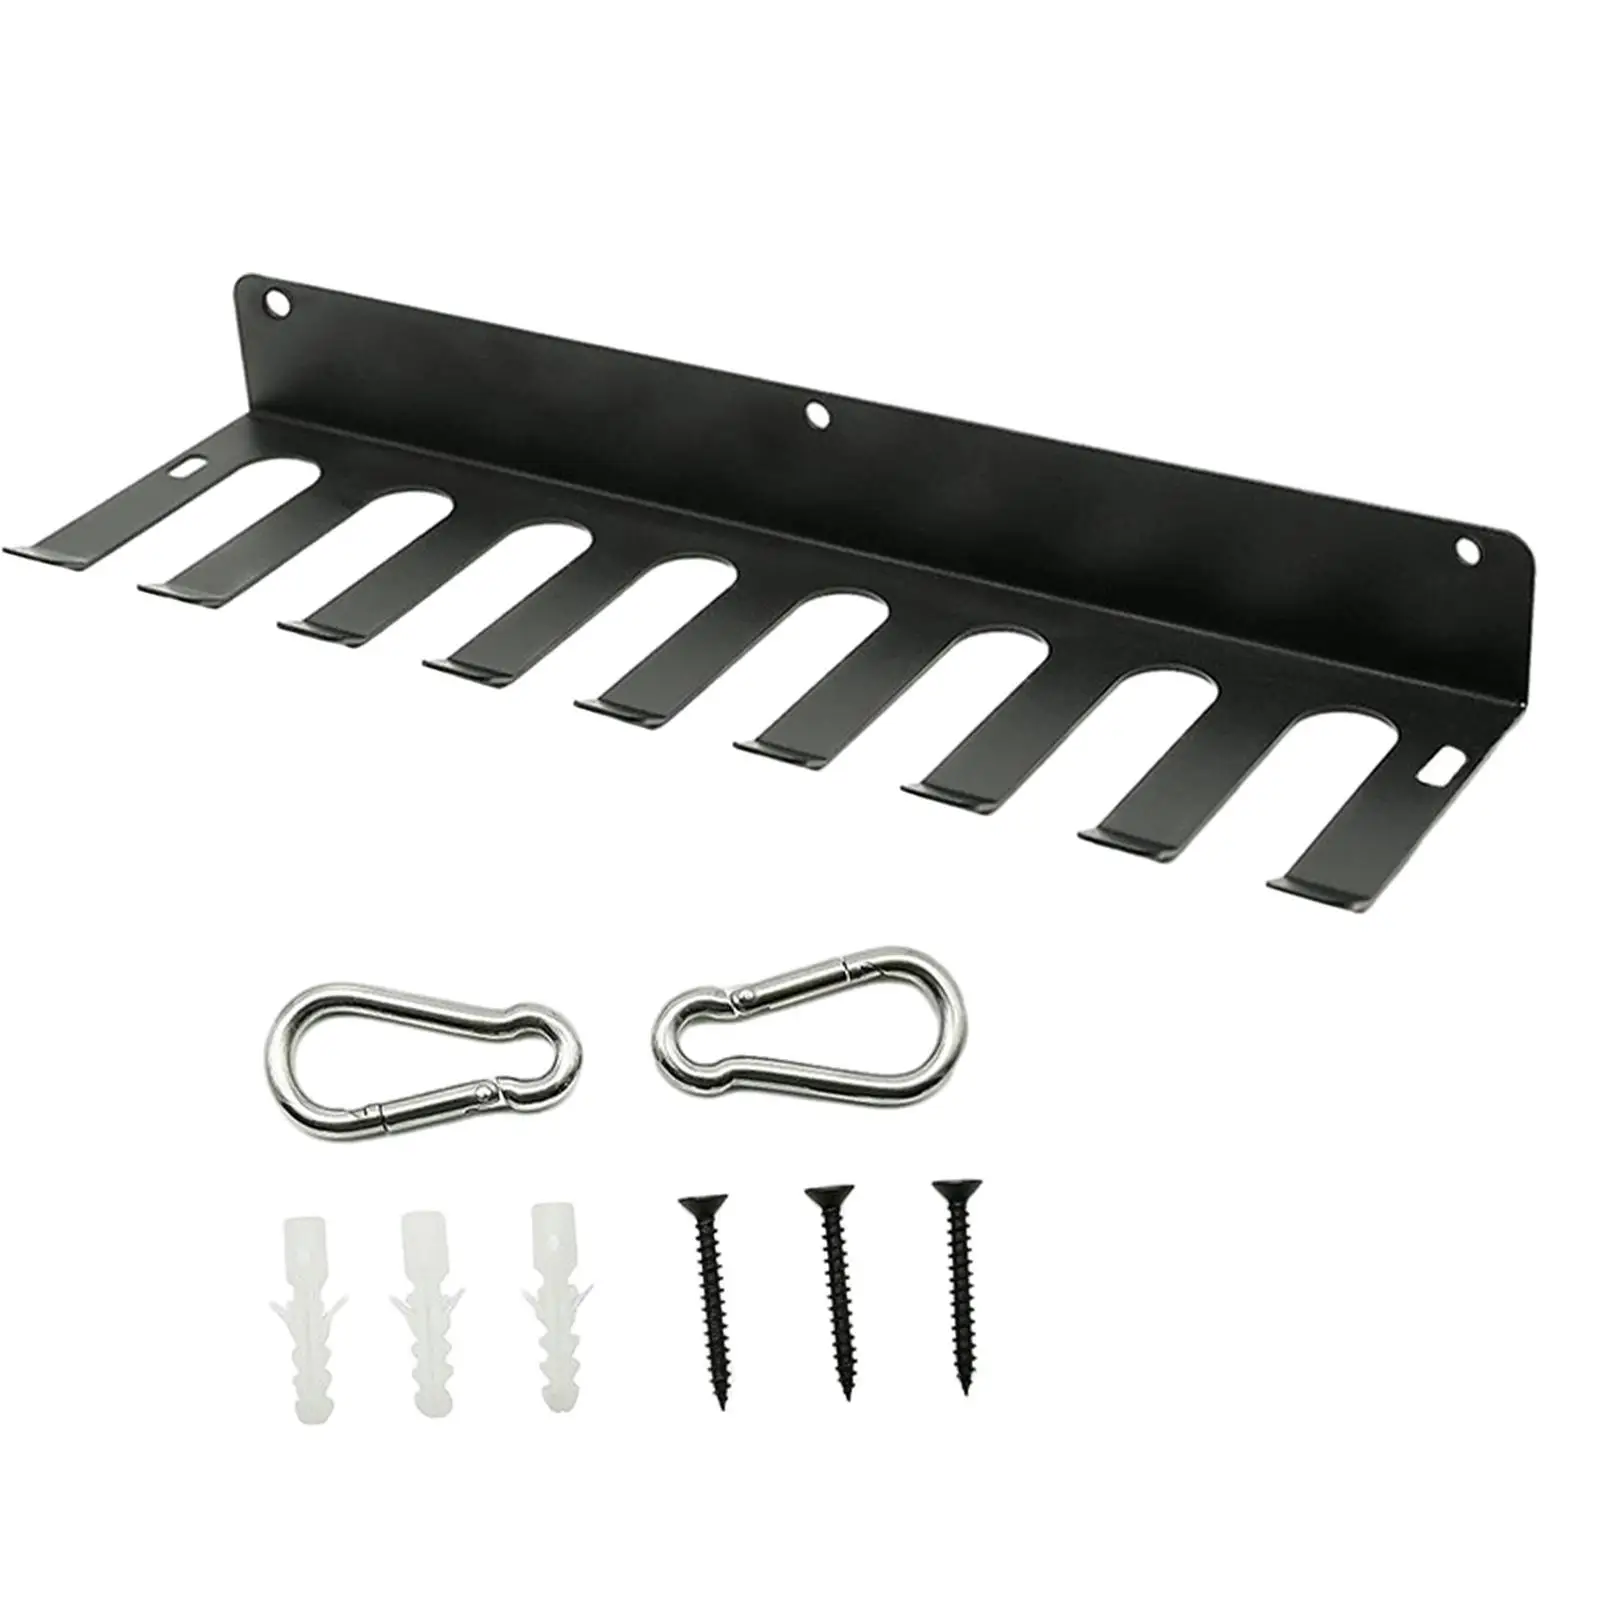 Baseball Bats Rack Wall Mount with Screws with 2 Snap Hooks Hanging Organizer